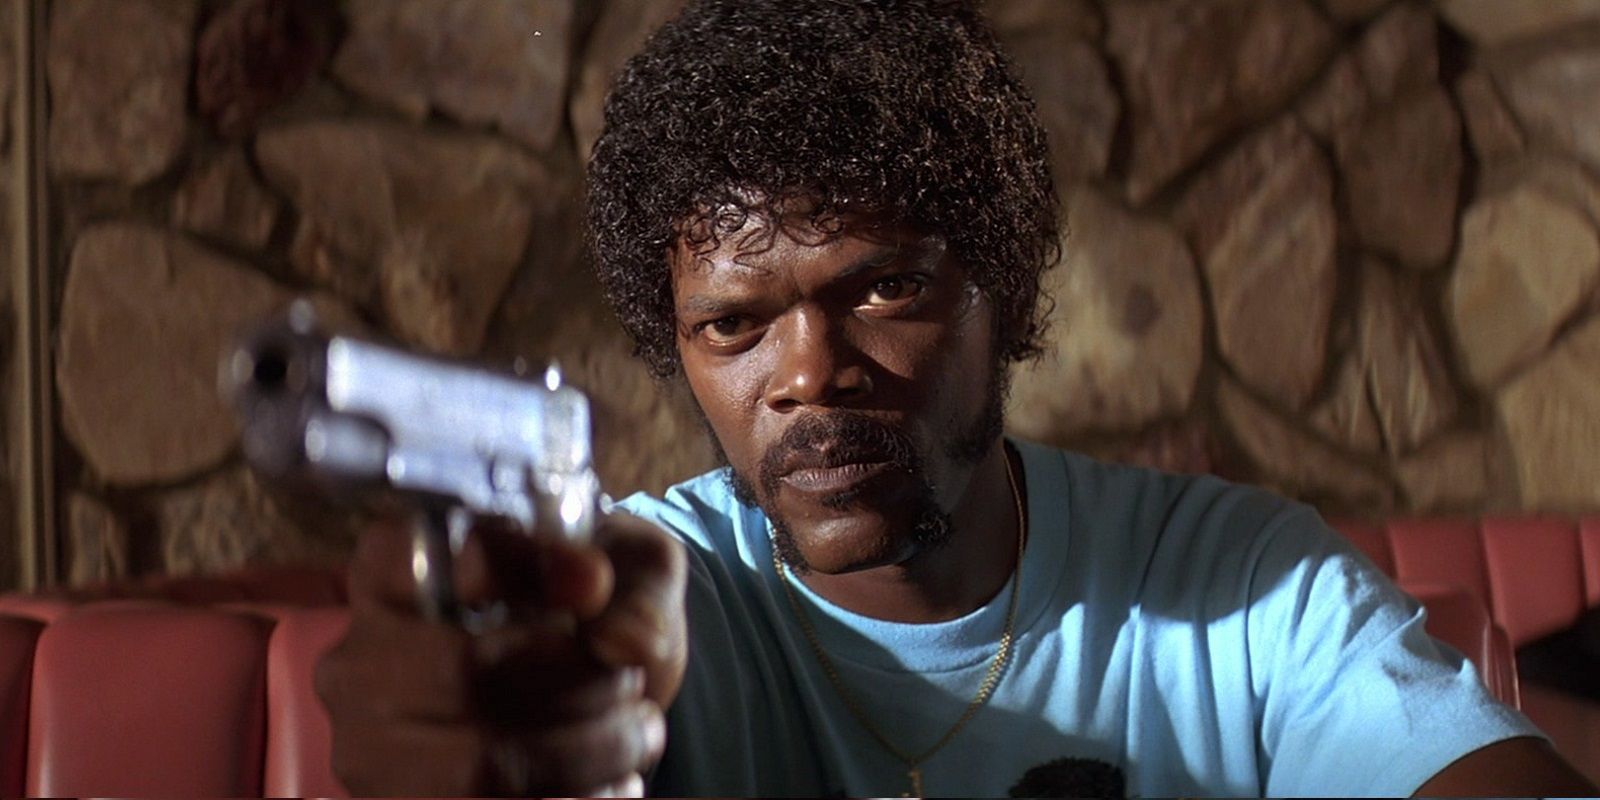 Samuel L Jackson His 5 Most Iconic Roles (& 5 Movies That Wasted His Talents)